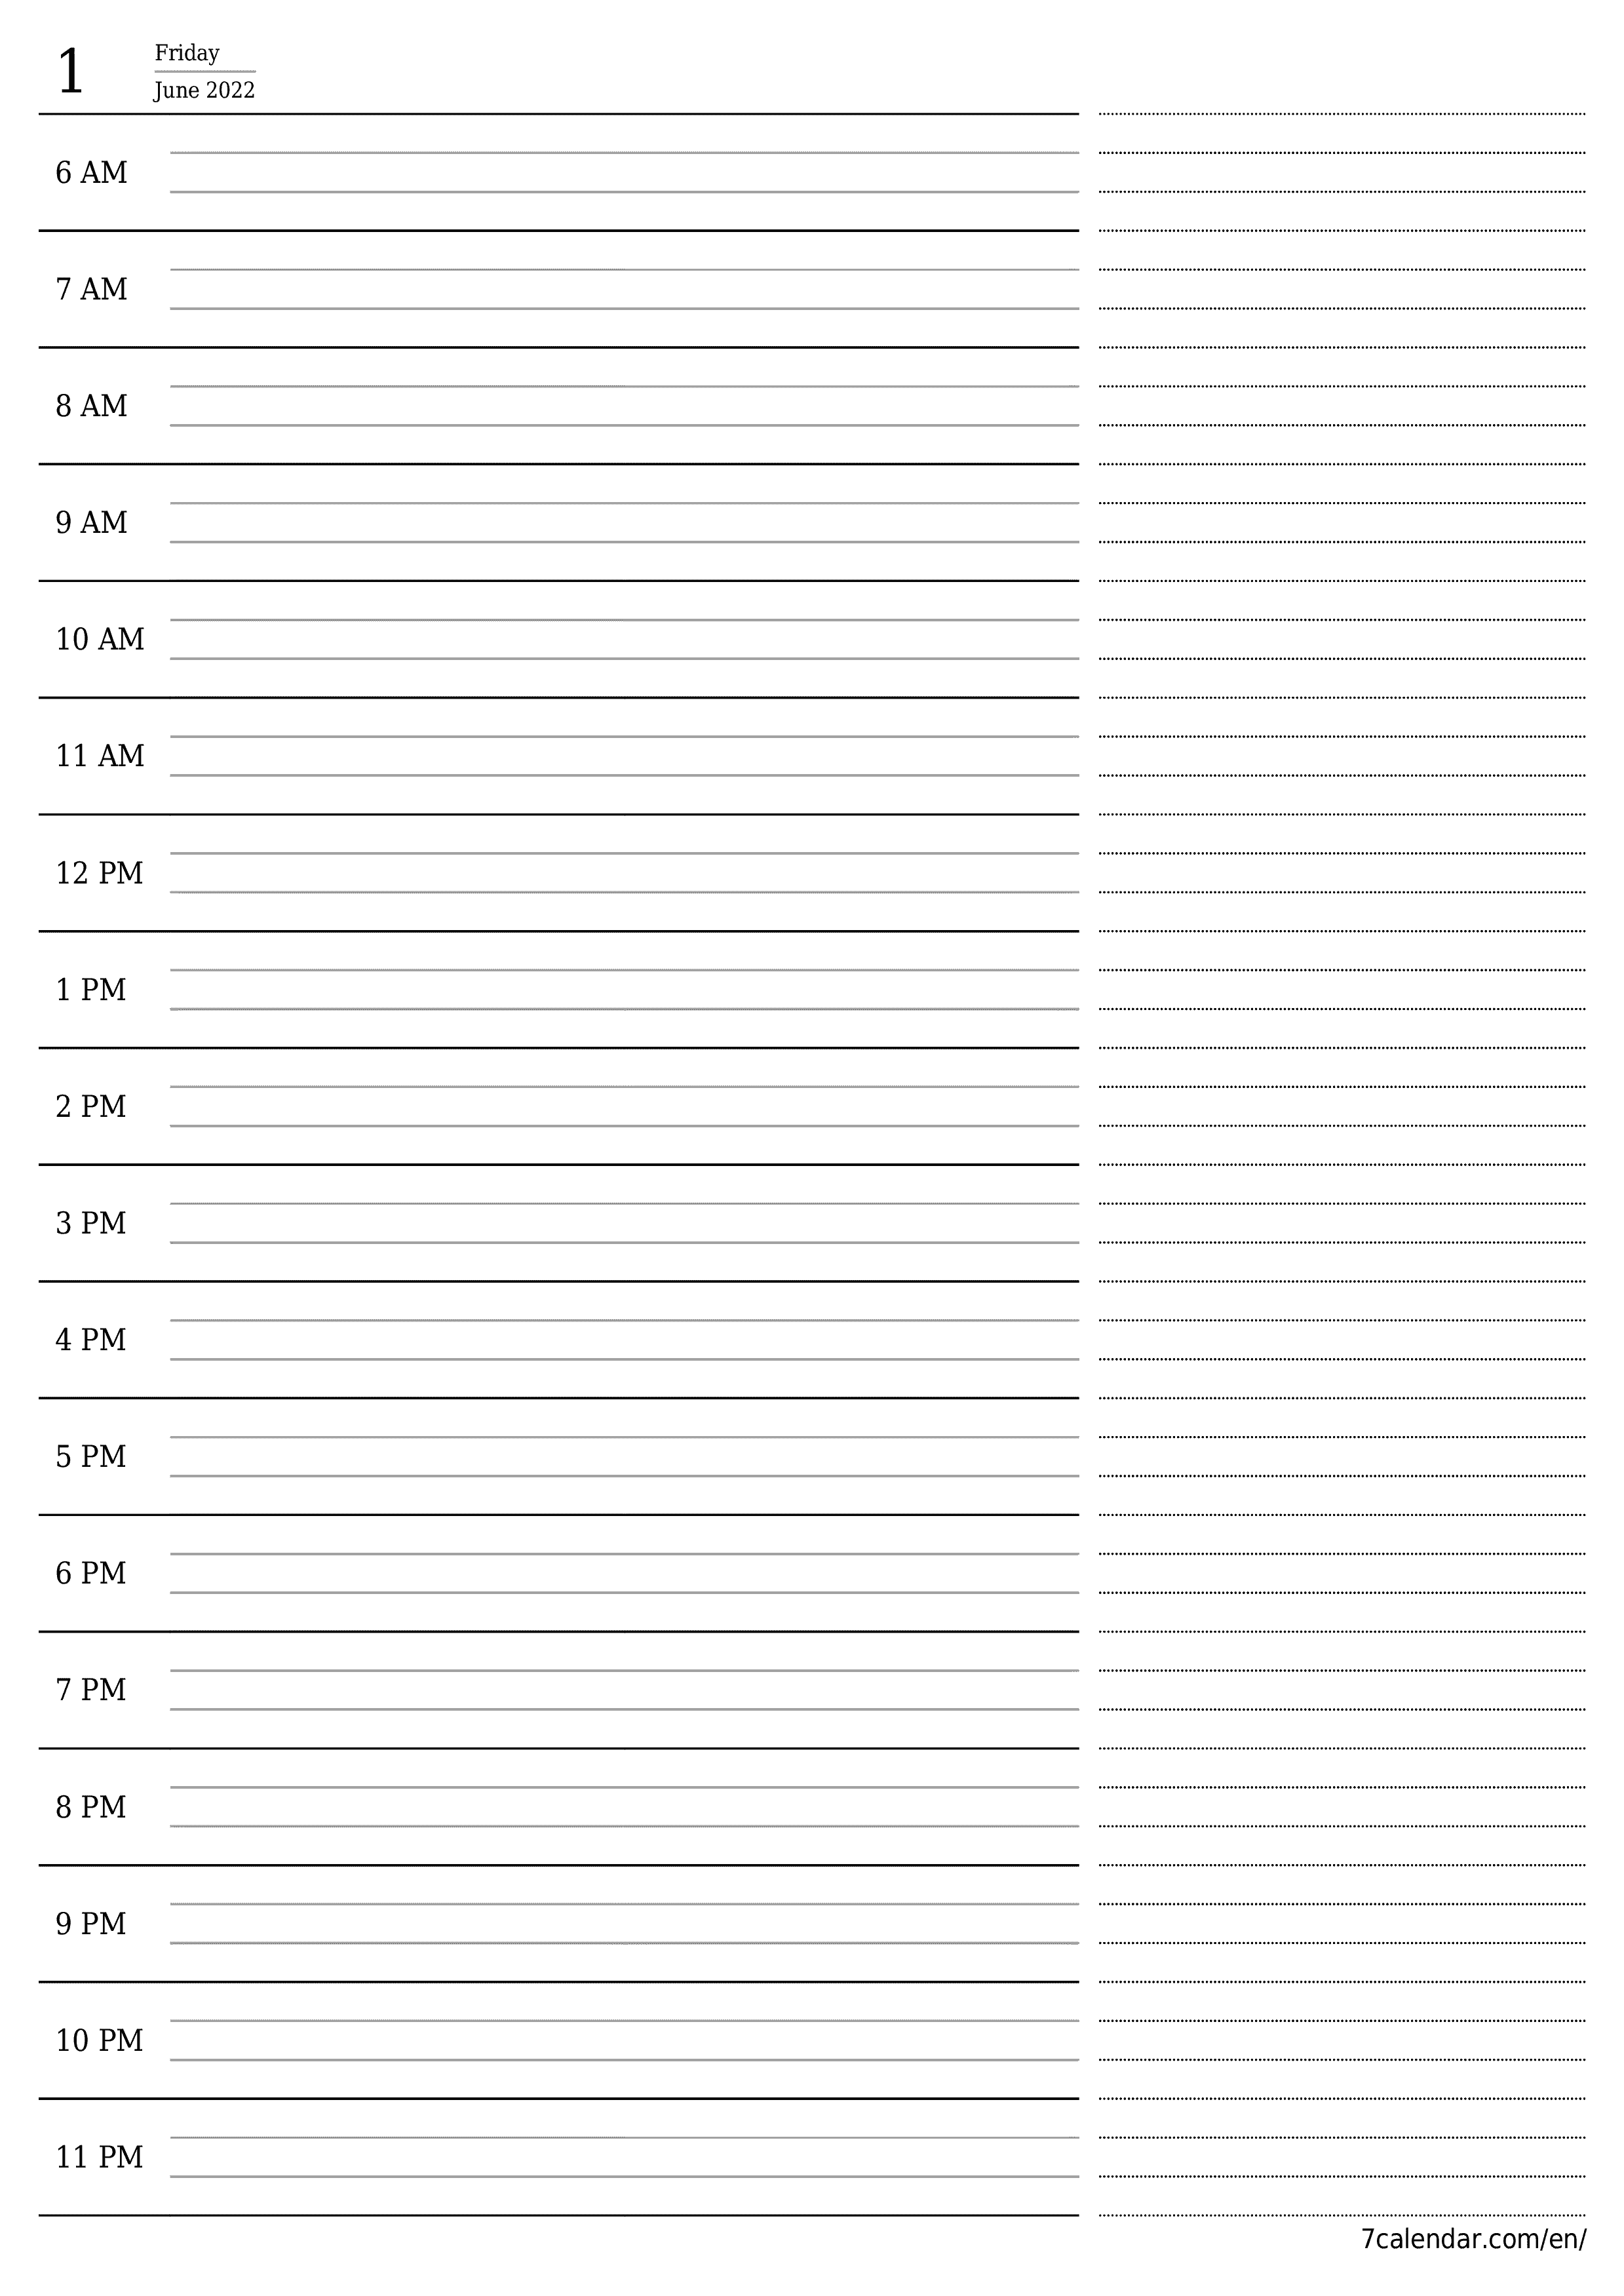 Blank daily printable calendar and planner for day June 2022 with notes, save and print to PDF PNG English - 7calendar.com